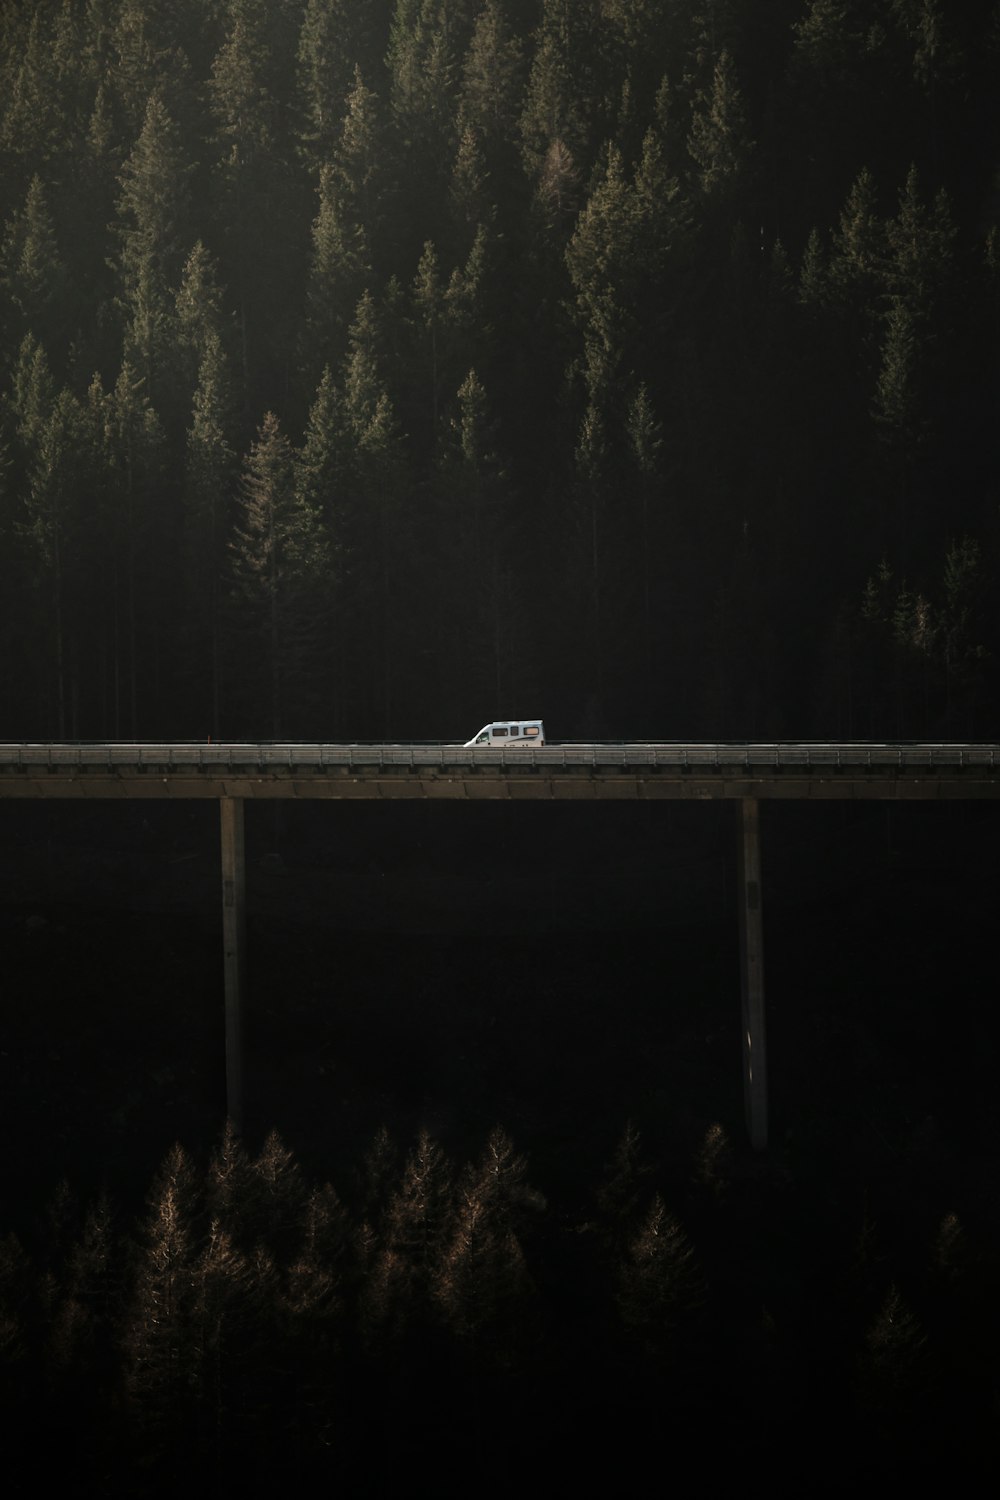 a car is driving on a highway near a forest